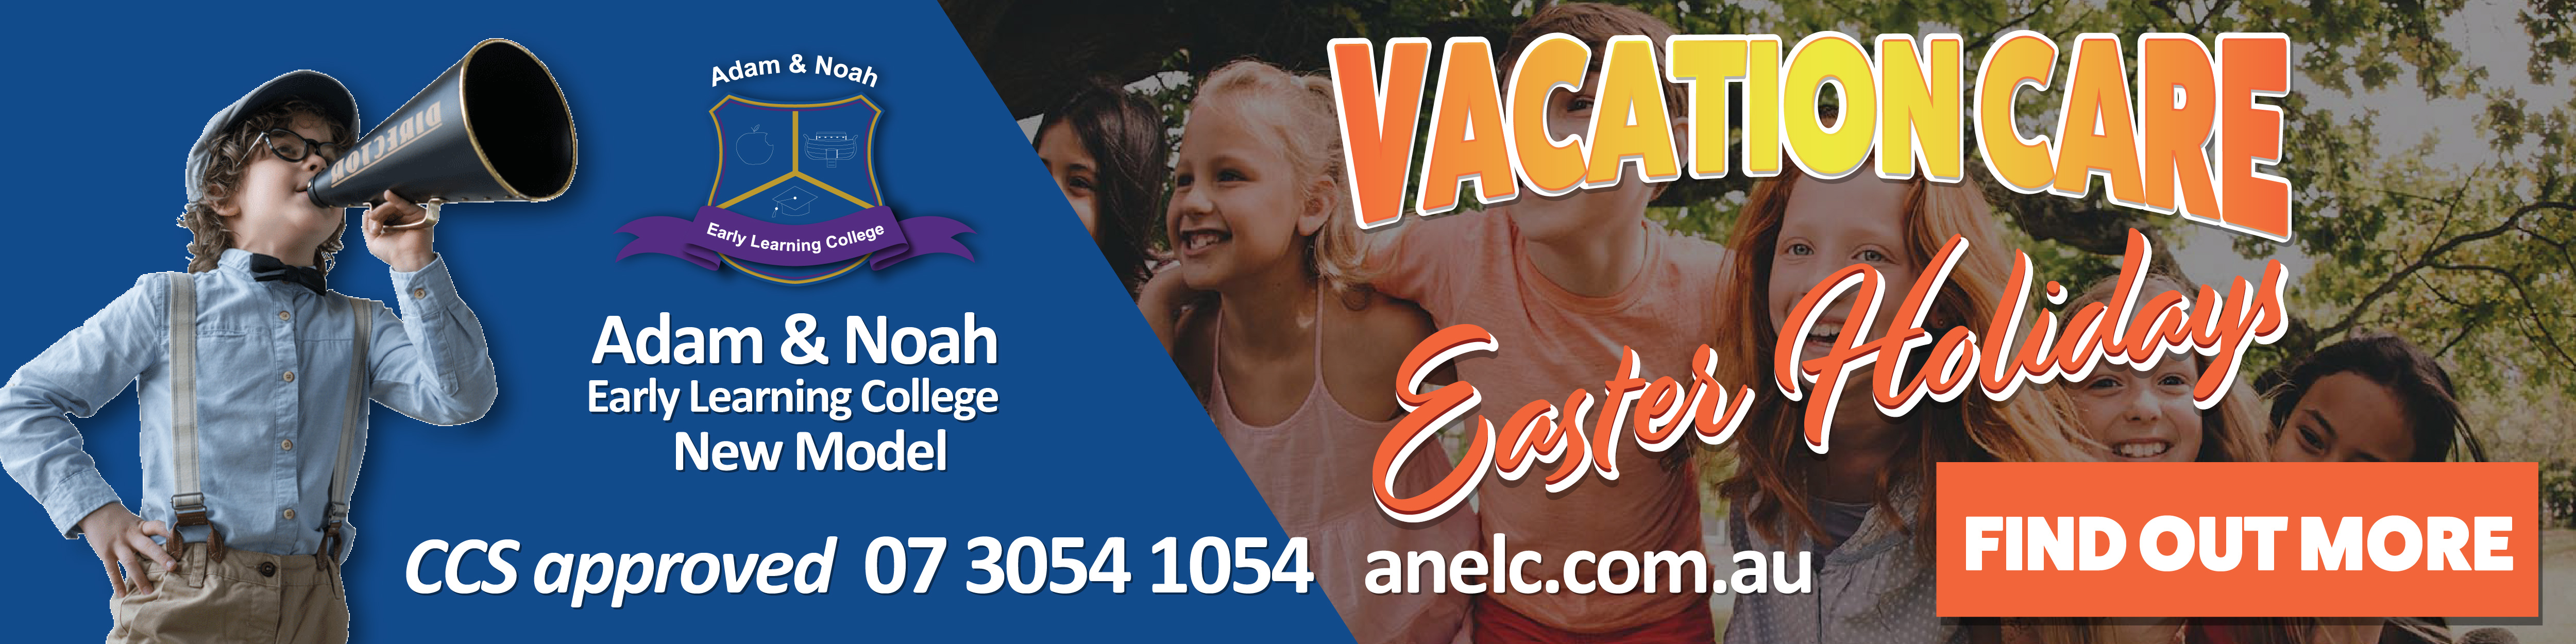 Adam and Noah Easter Vacation Care in Brisbane banner ad